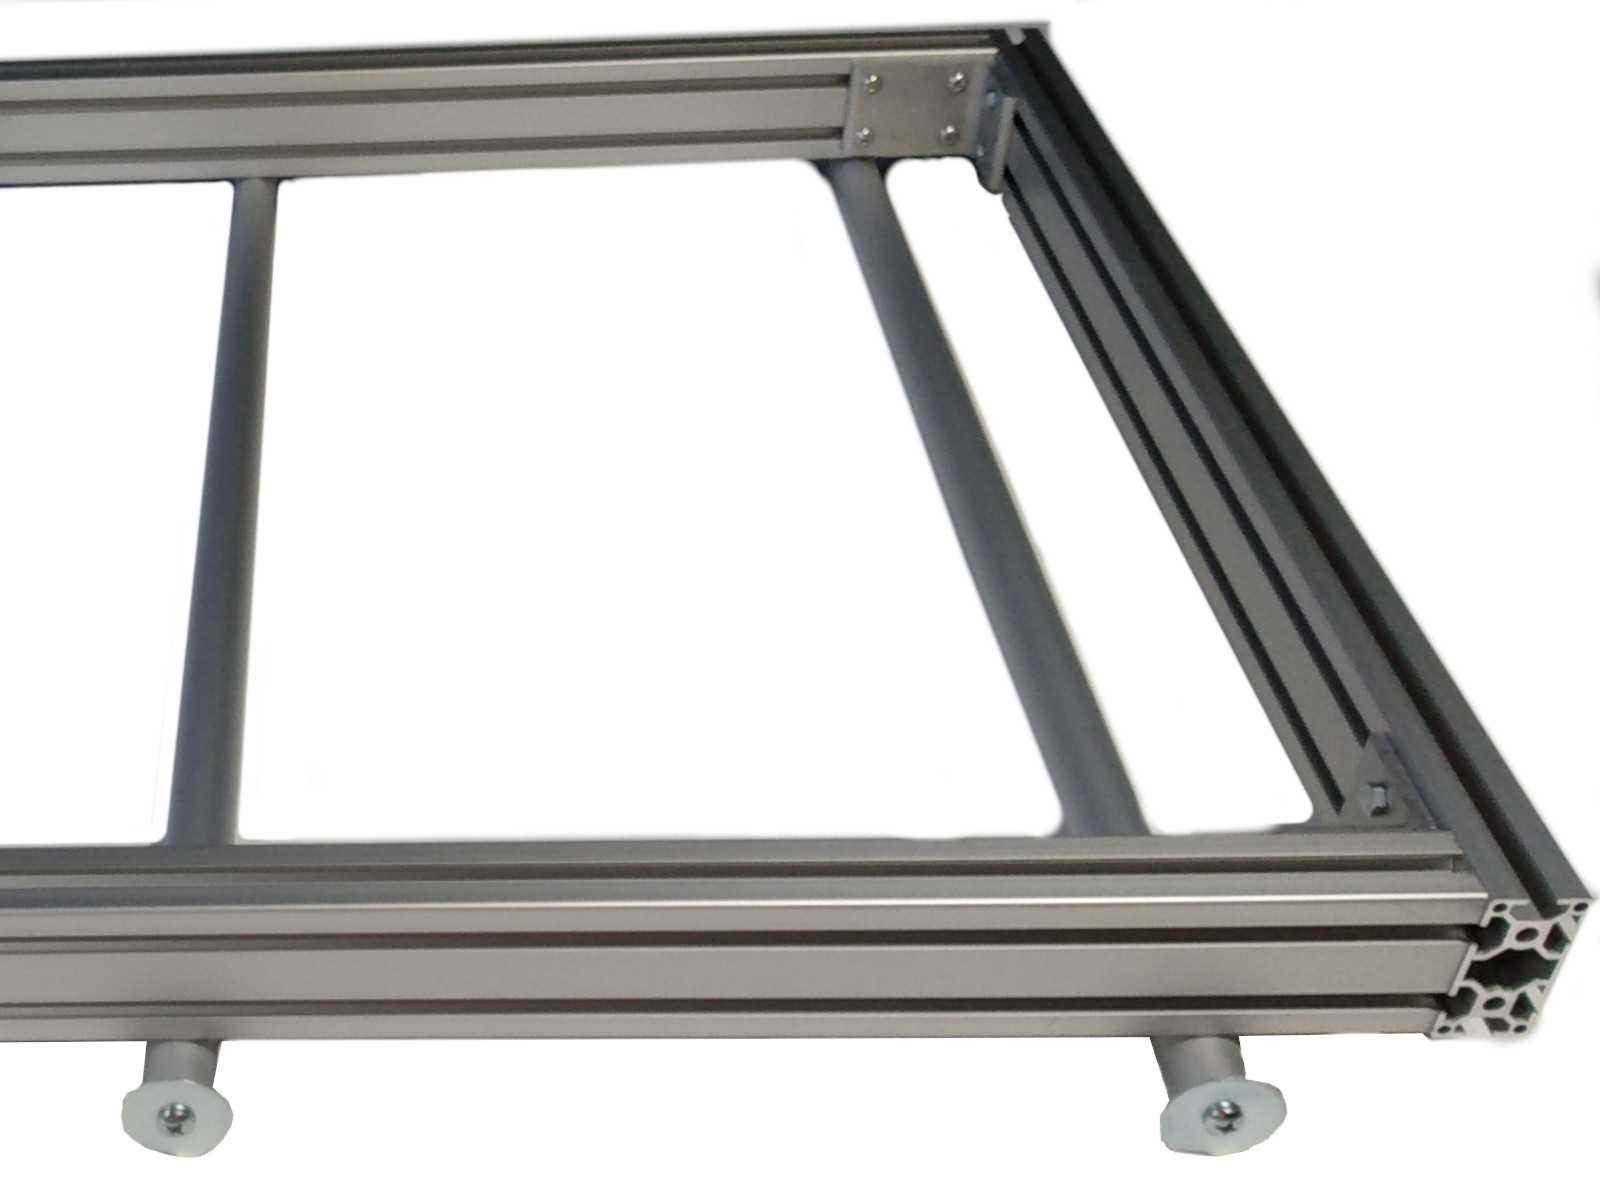 extrusions in rear trailer frame